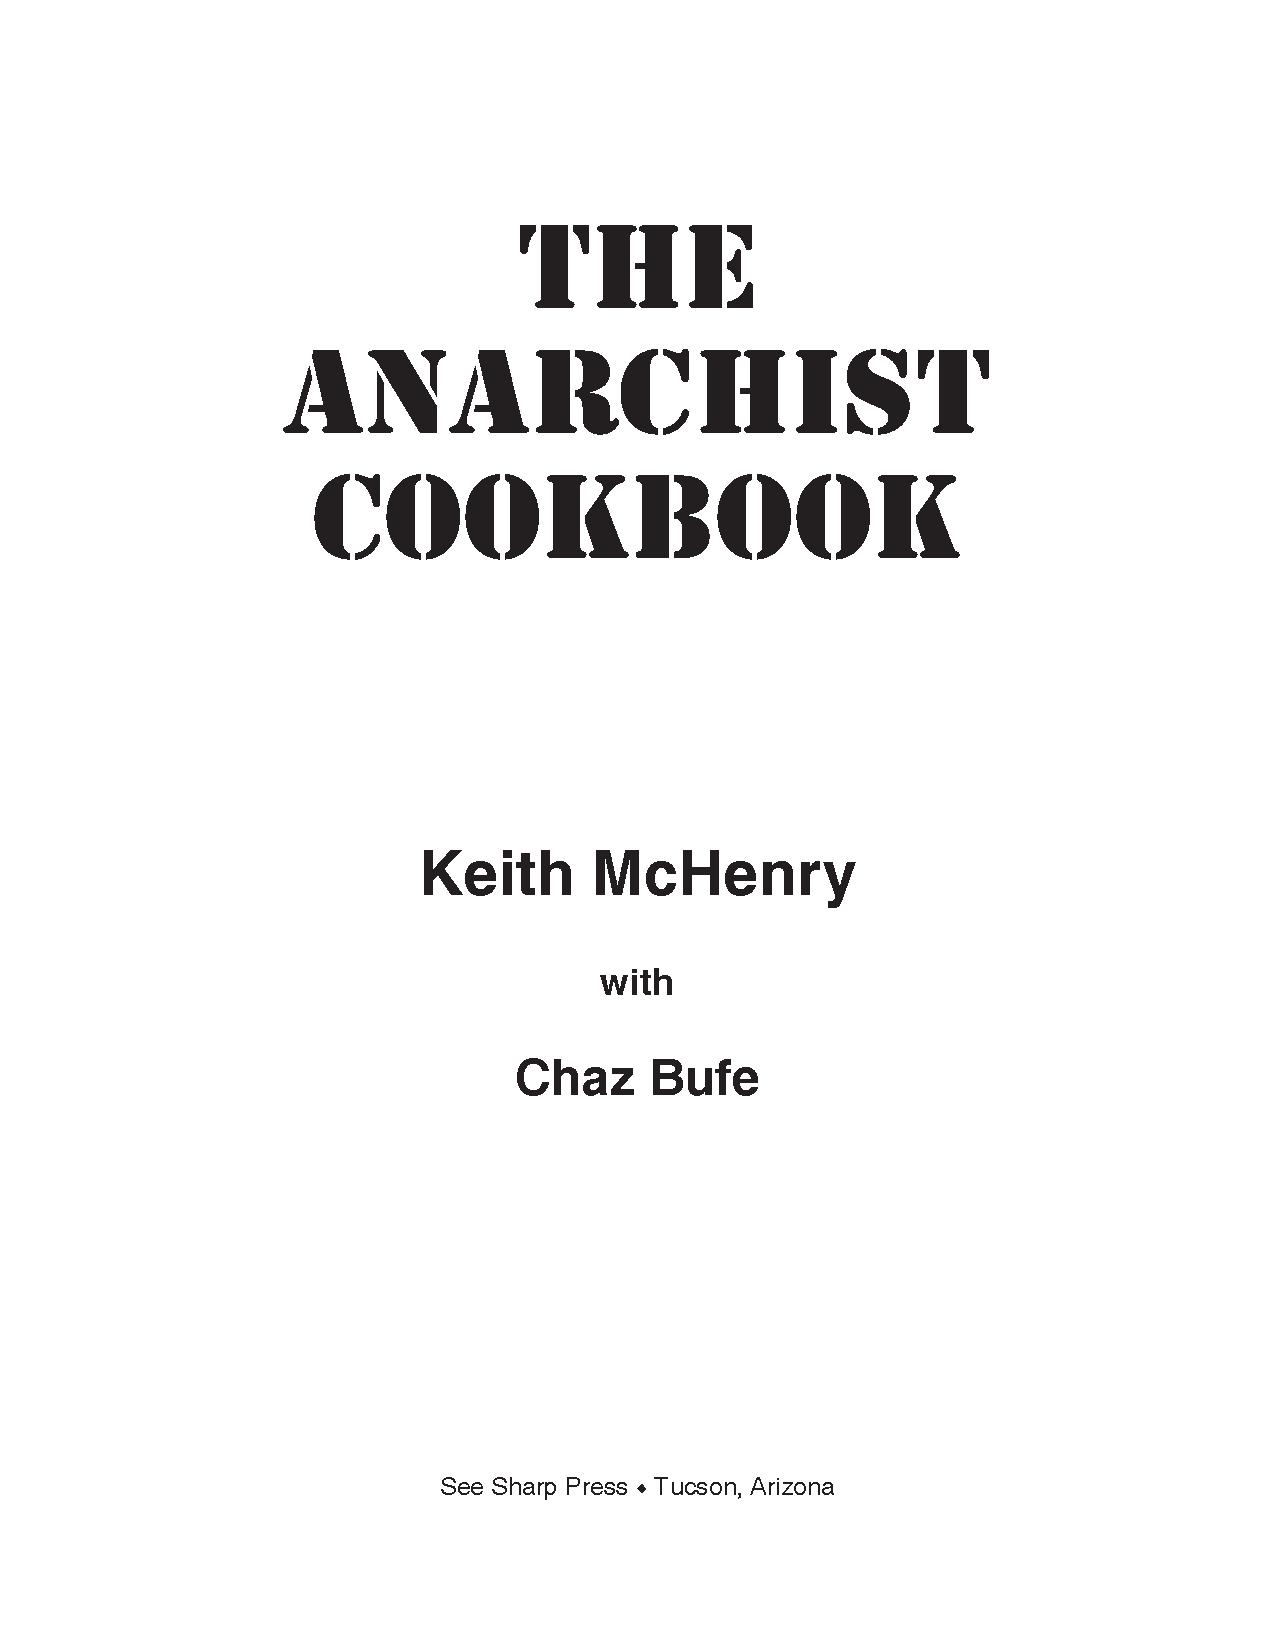 The Anarchist Cookbook - Keith McHenry, Chaz Bufe